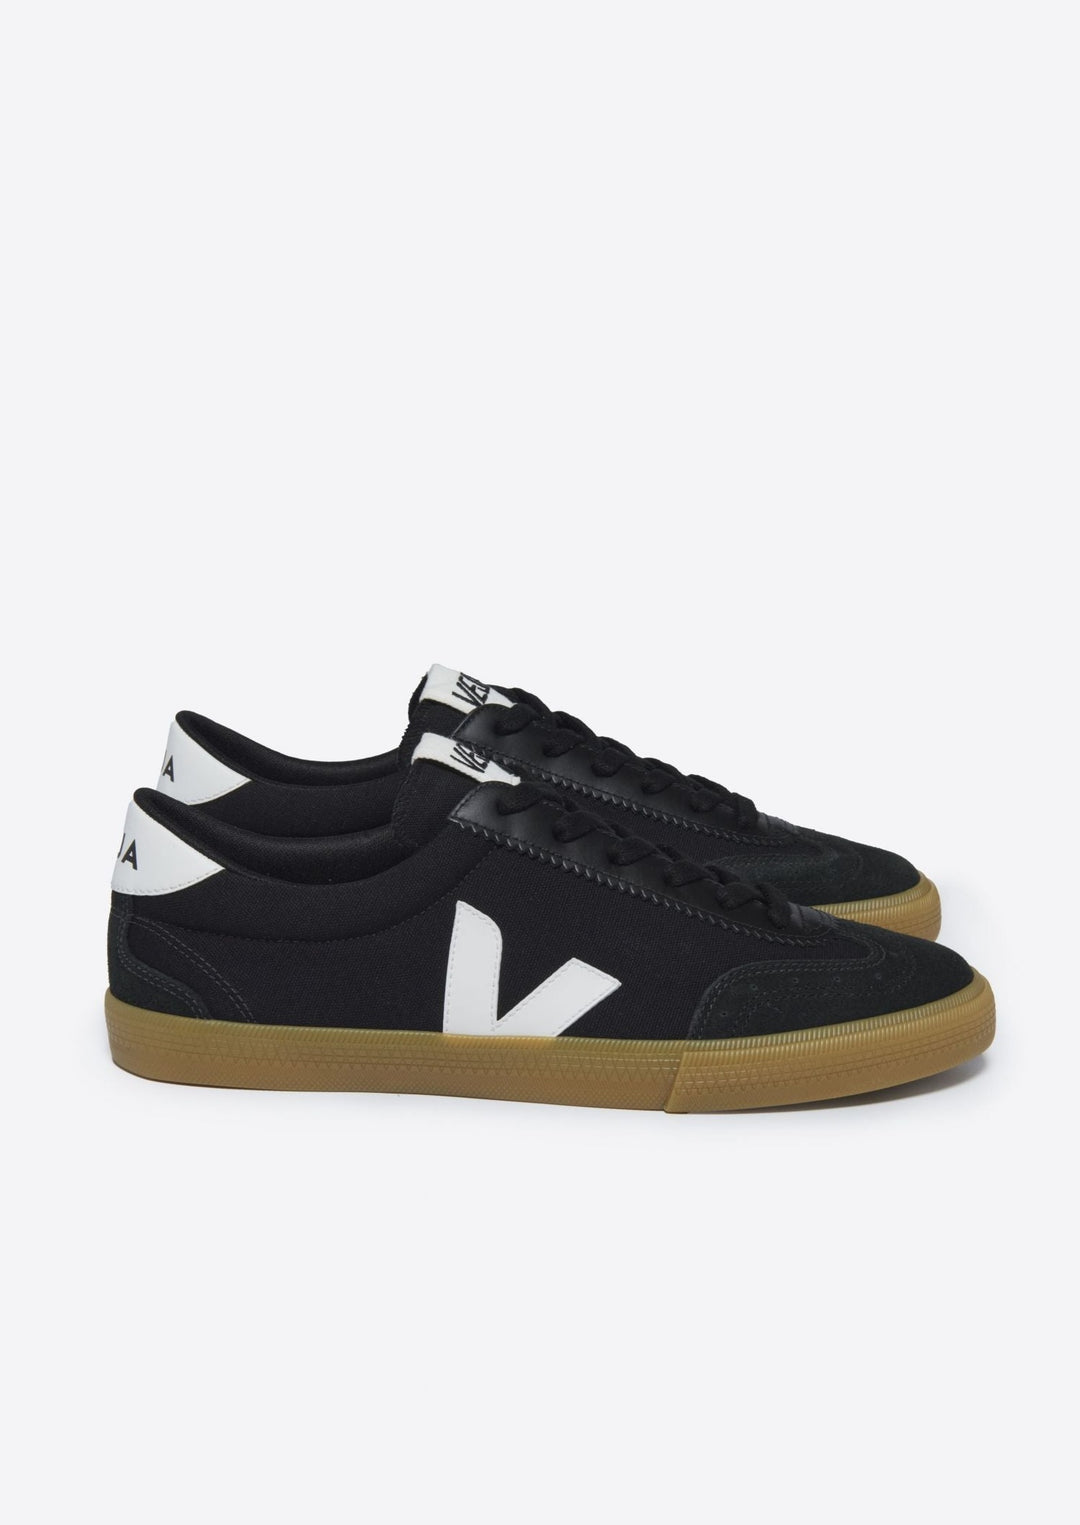 Men's Volley Canvas Sneakers - Black/ White/ Natural